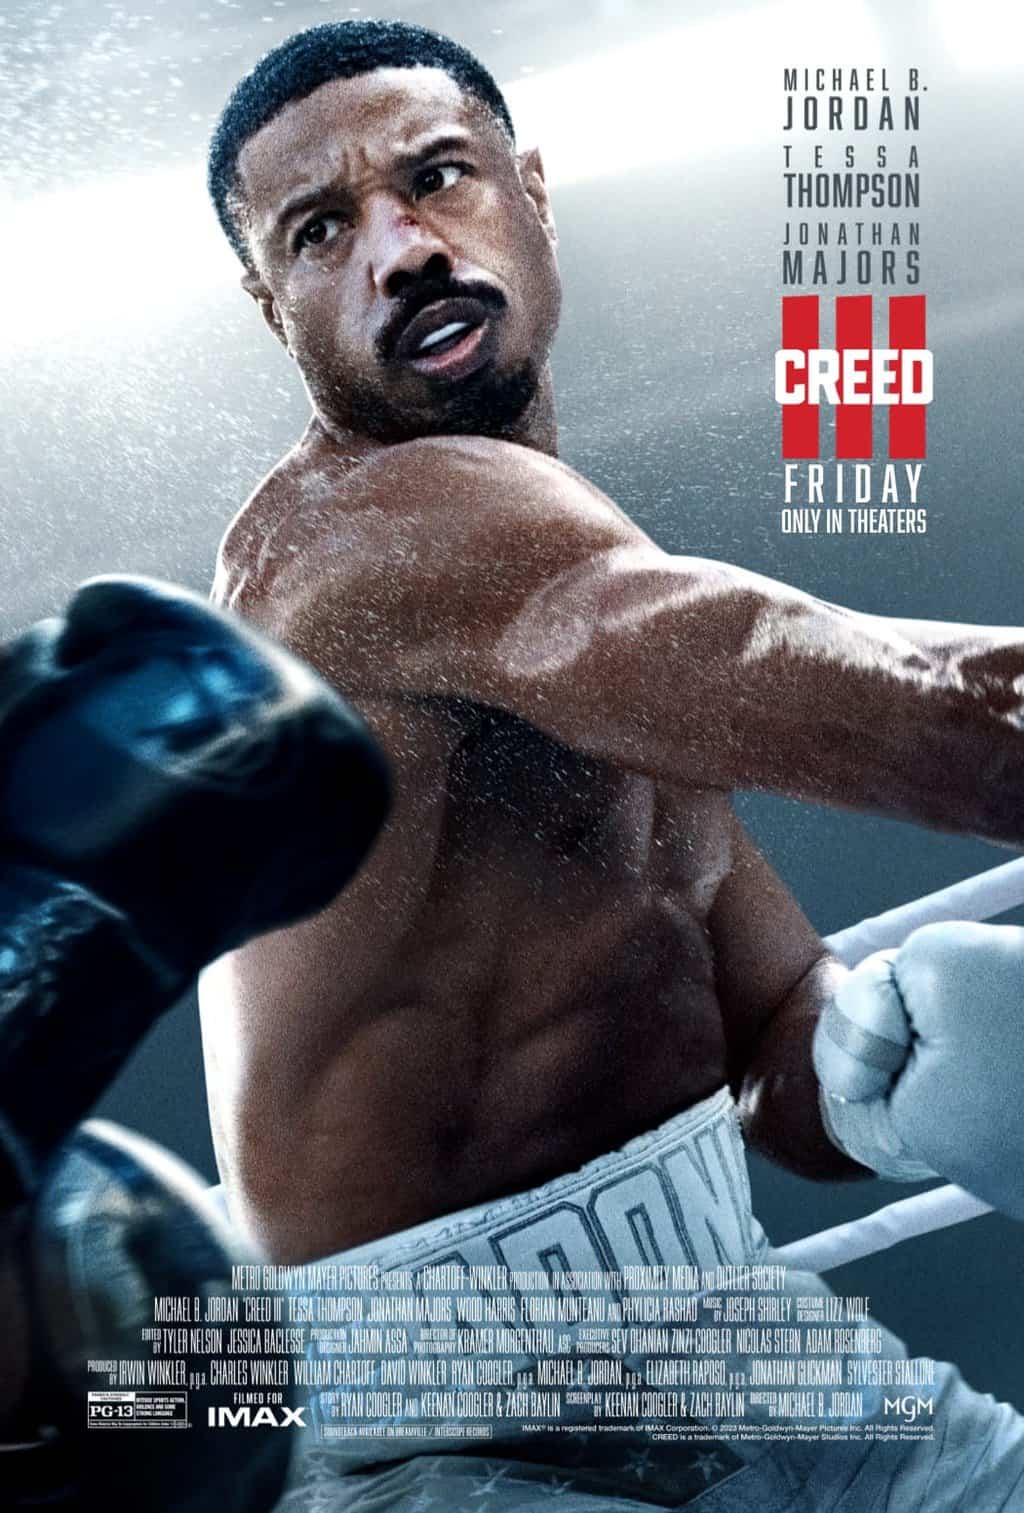 age rating of Creed III parents guide. Movie Poster showing a boxer hitting someone wearing white trunks.